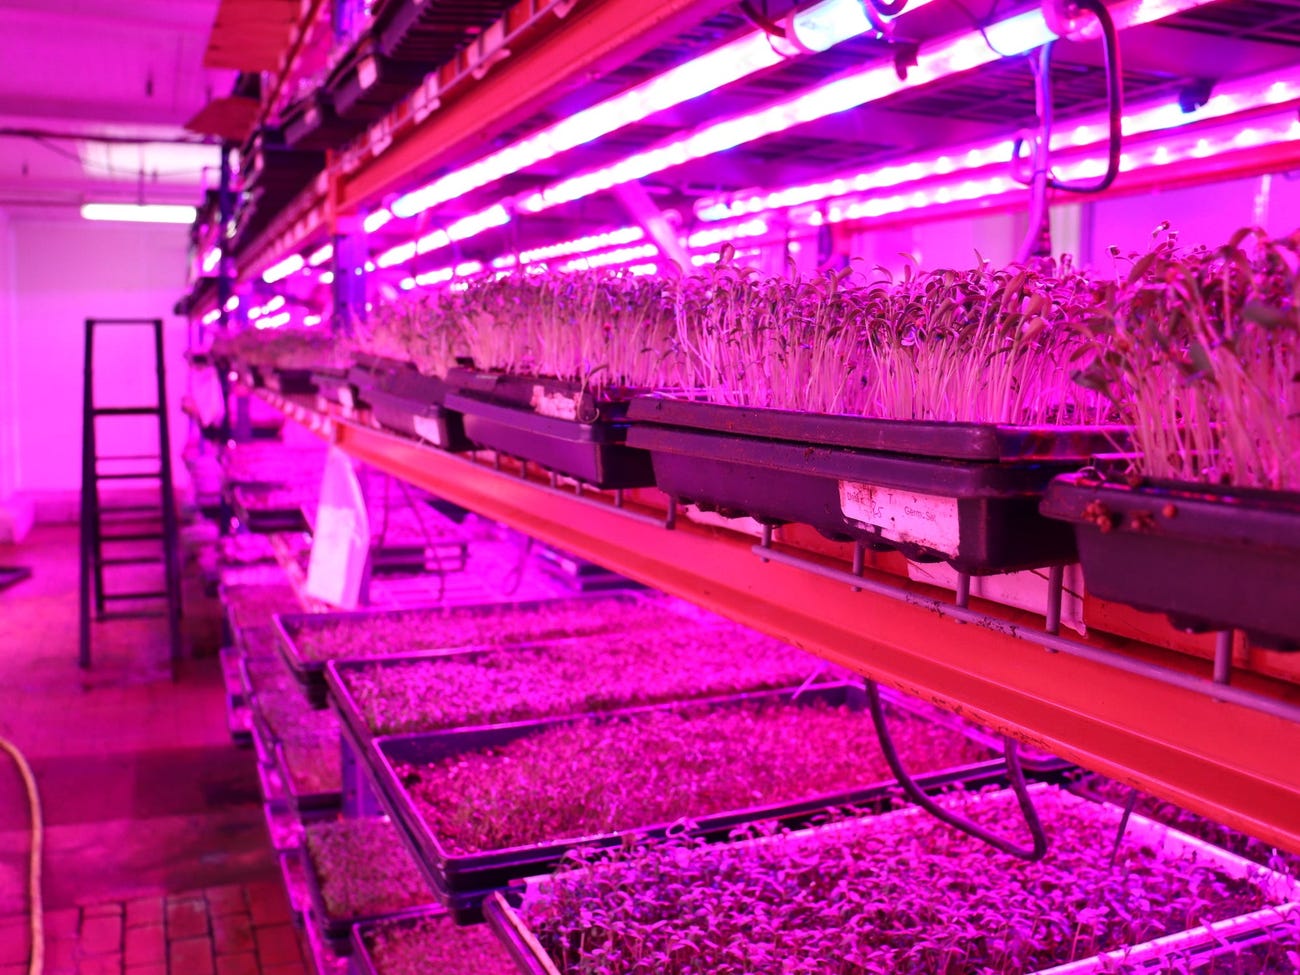 microgreens grow in black trays under growlights on three tiers of racks in a room washed in pink light